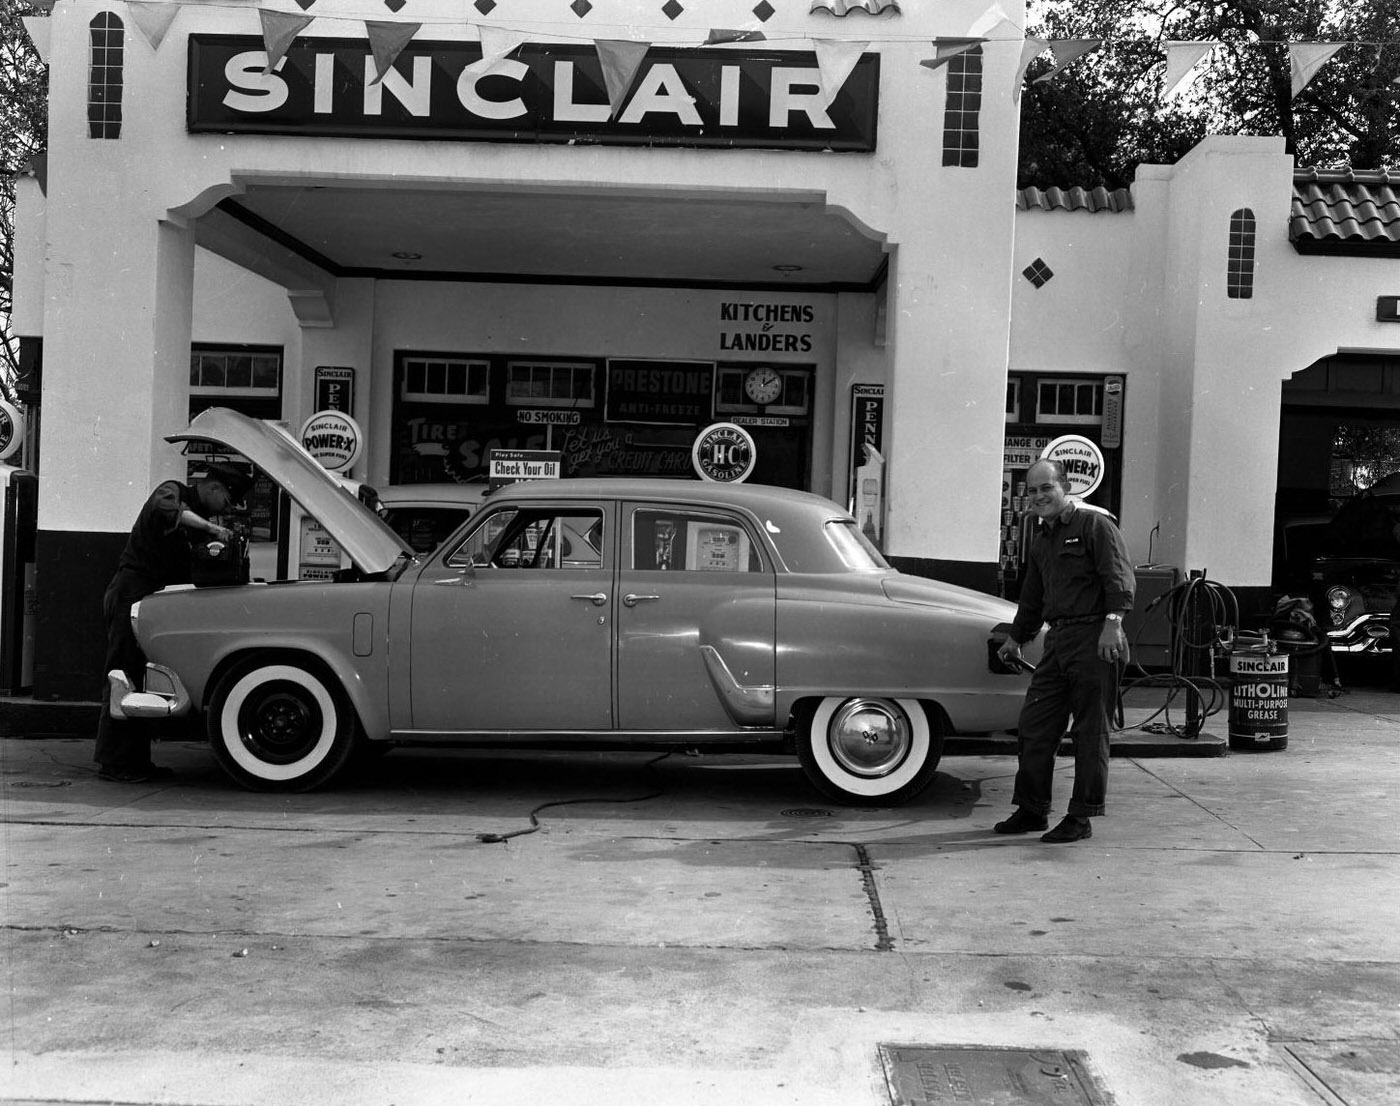 Attendants at Sinclair Service Station, 1955.